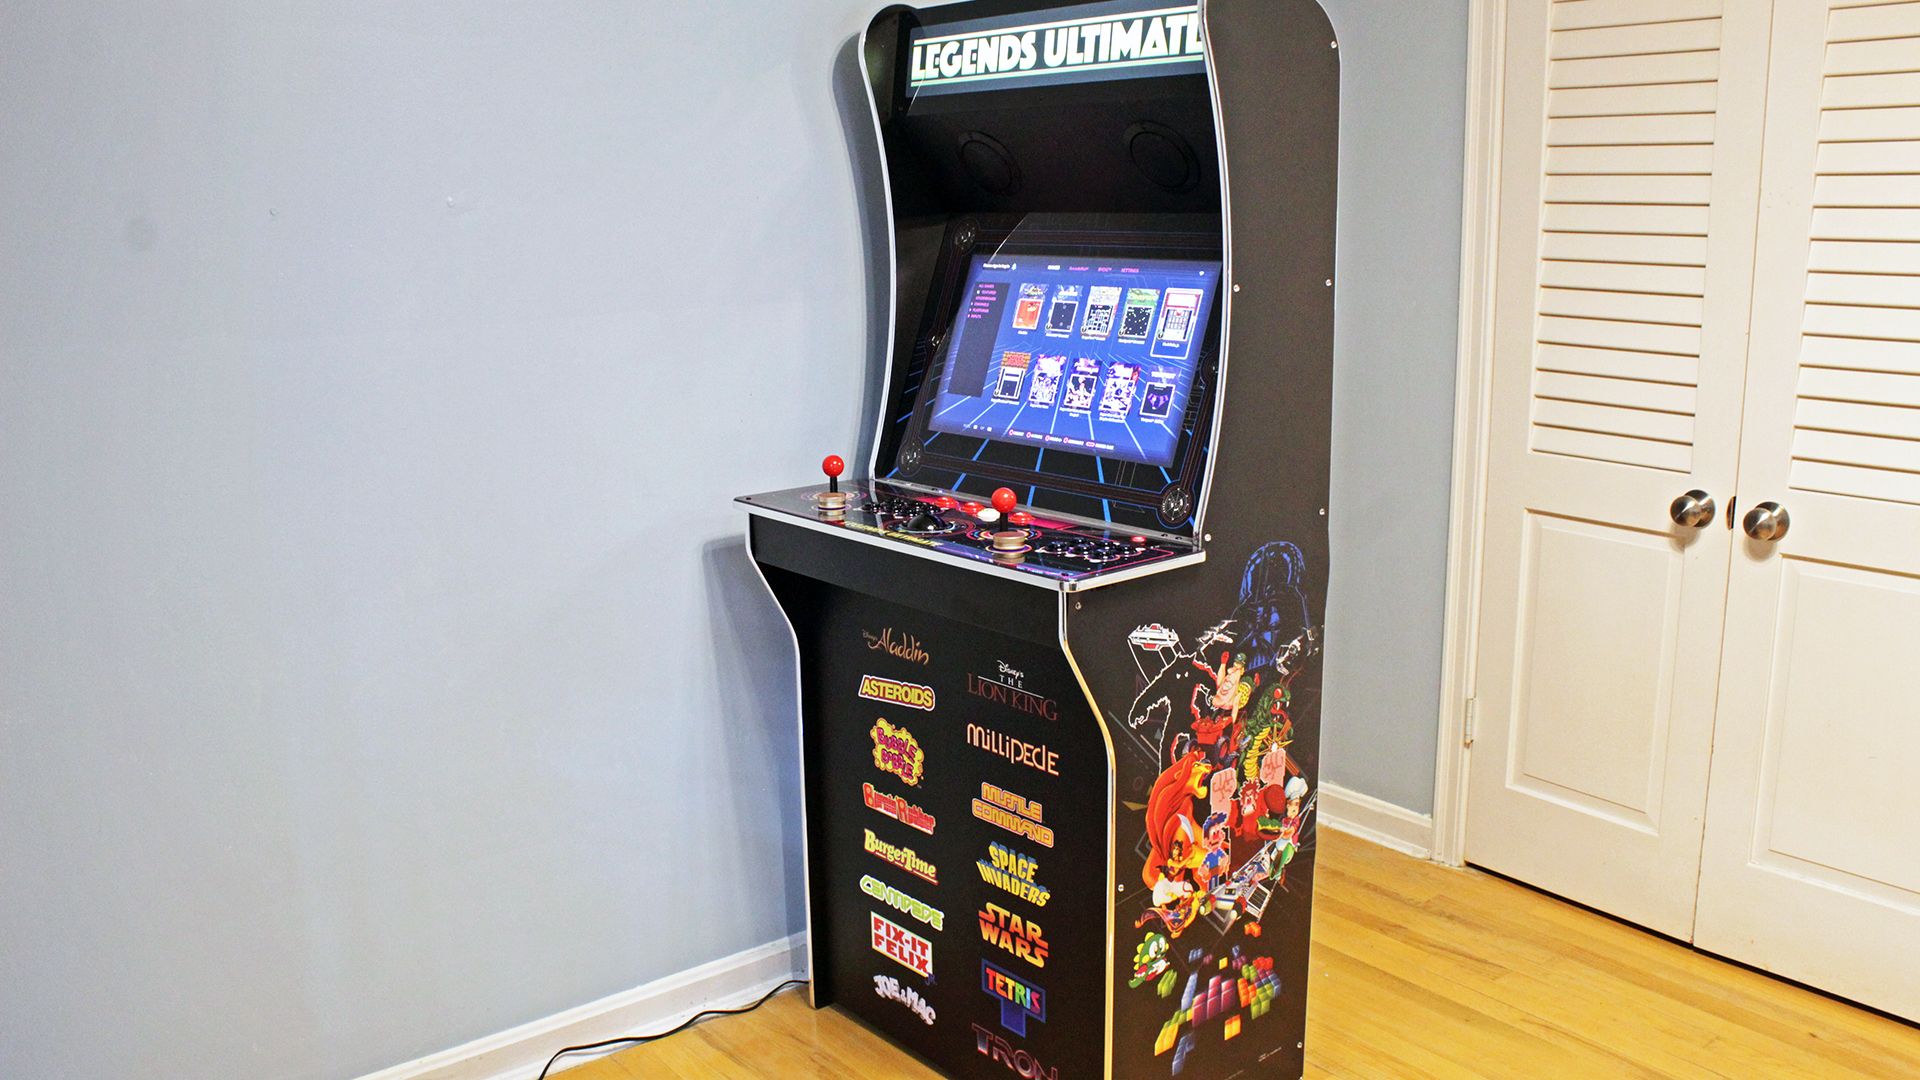 A three-quarter profile, showing artwork with various video game characters.